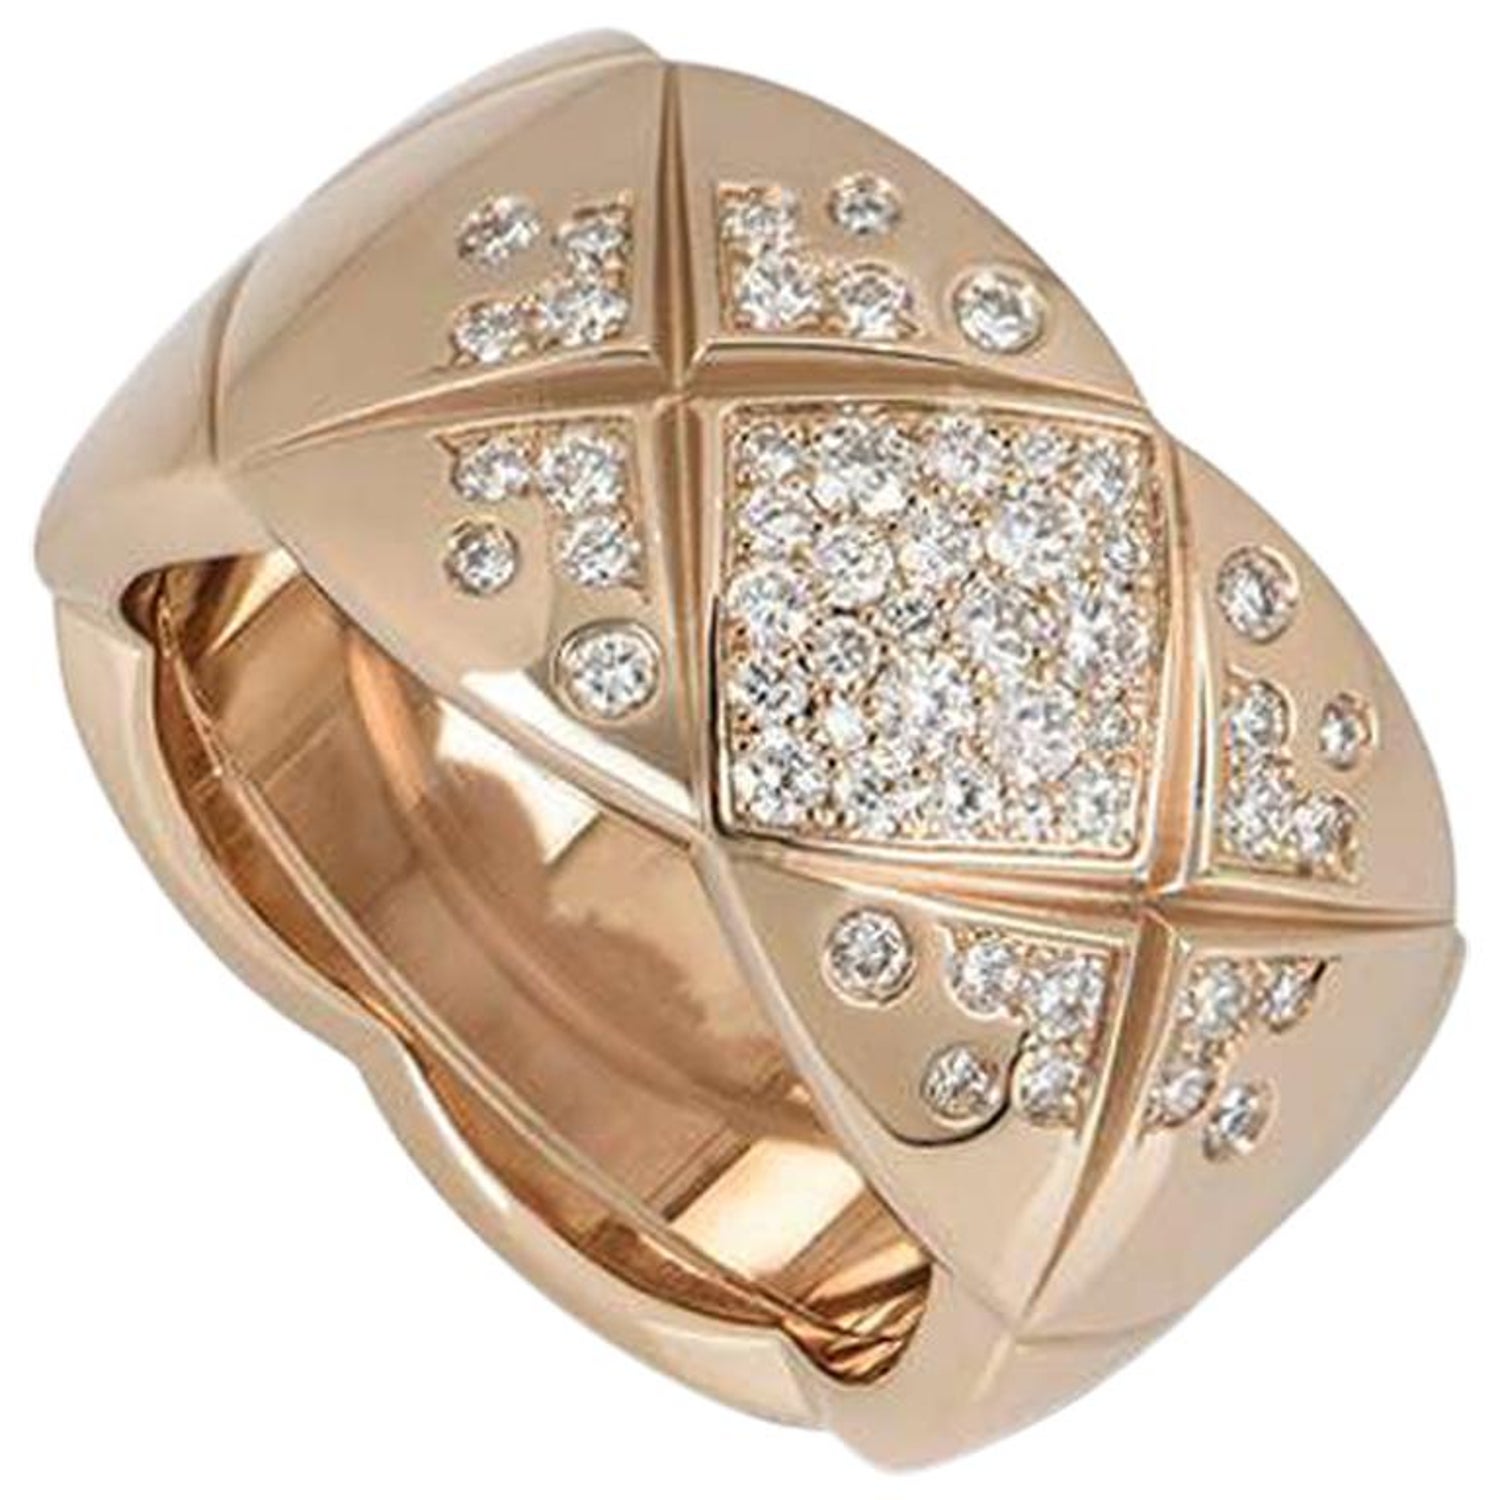 Chanel Coco Crush Diamond Ring - 3 For Sale on 1stDibs